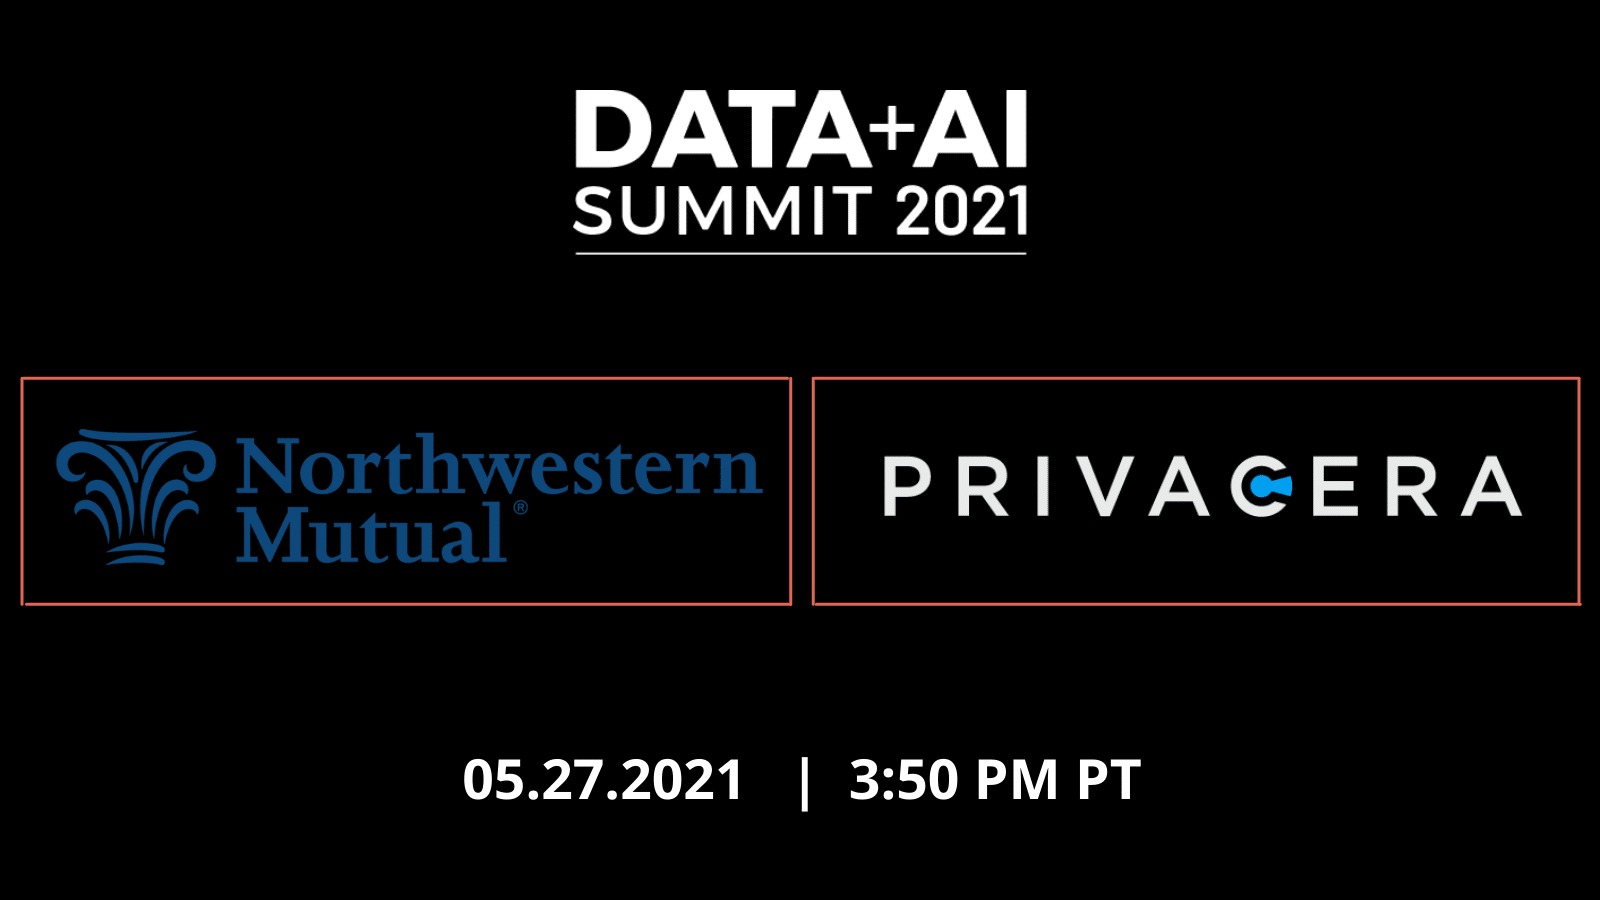 Privacera & Northwestern Mutual: Everything You Need to Know About Data Privacy at Databricks Data & AI Summit